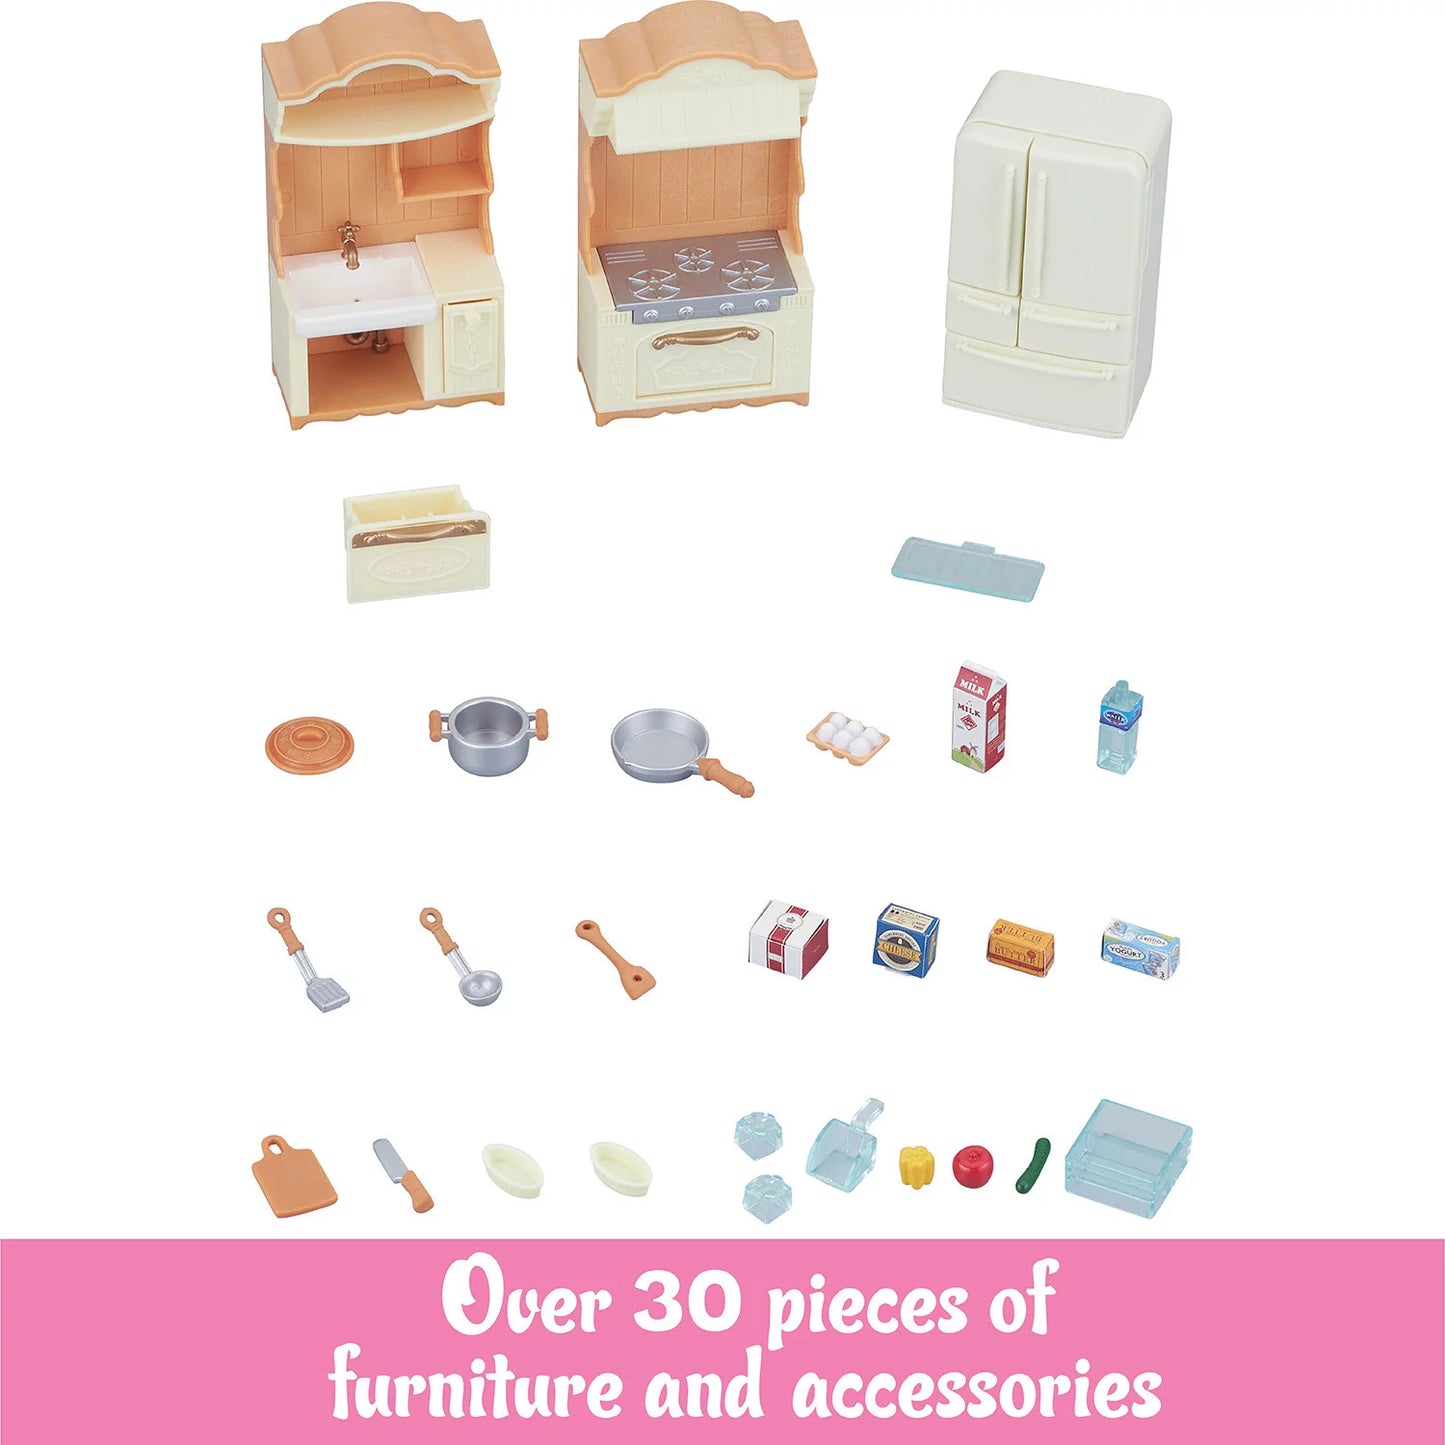 CALICO CRITTERS KITCHEN PLAY SET